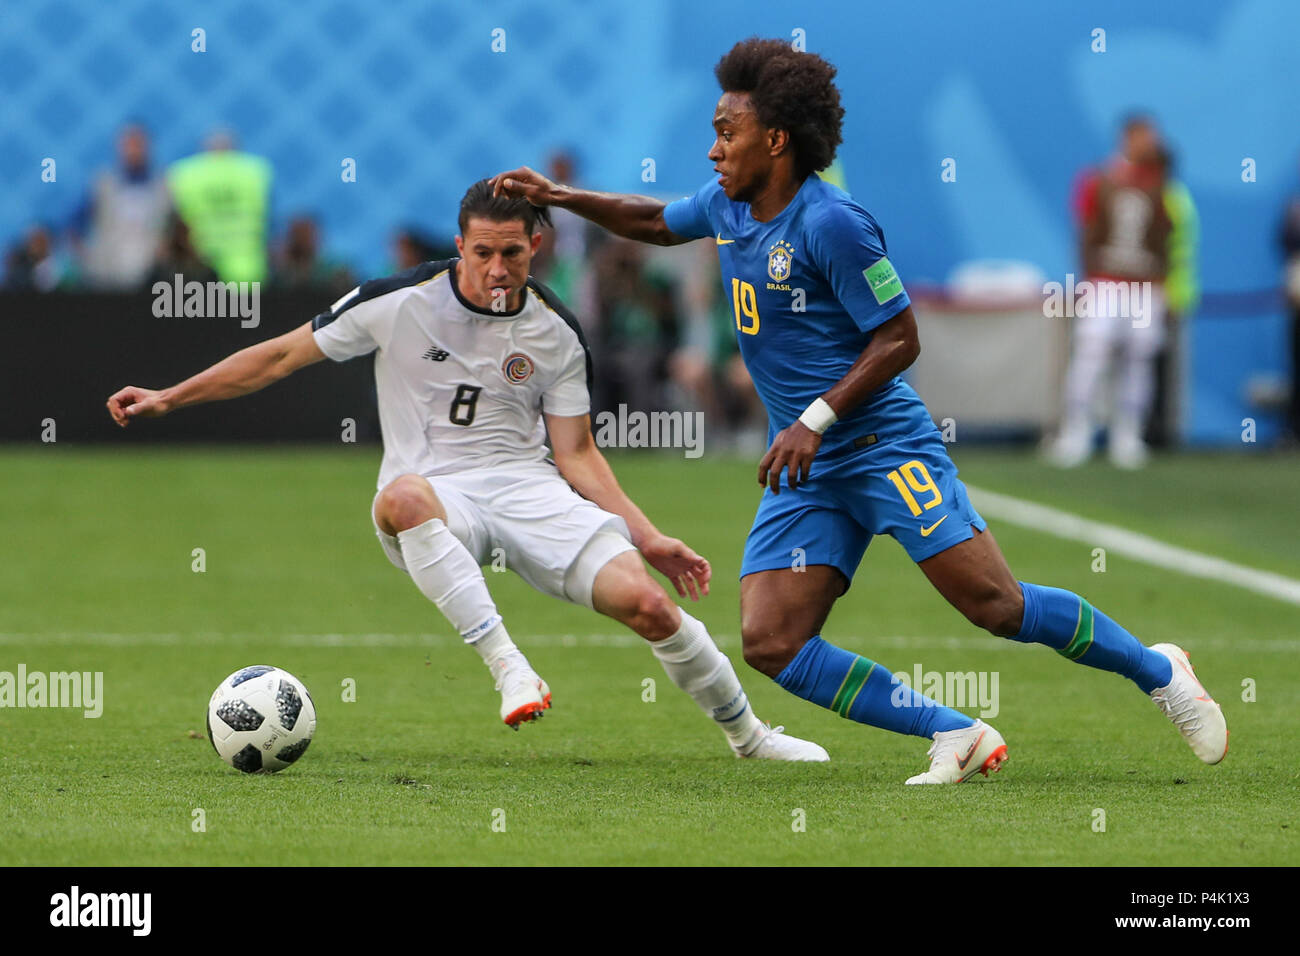 Sao Petesburgo, Russia. 22nd June, 2018. Bryan Oviedo of Costa Rica and Willian Borges da Silva of Brasil during the match between Brazil and Costa Rica for the second round of group E of the 2018 World Cup, held at Saint Petersburg Stadium, St. Petersburg, Russia. Game ended scoreless. Credit: Thiago Bernardes/Pacific Press/Alamy Live News Stock Photo